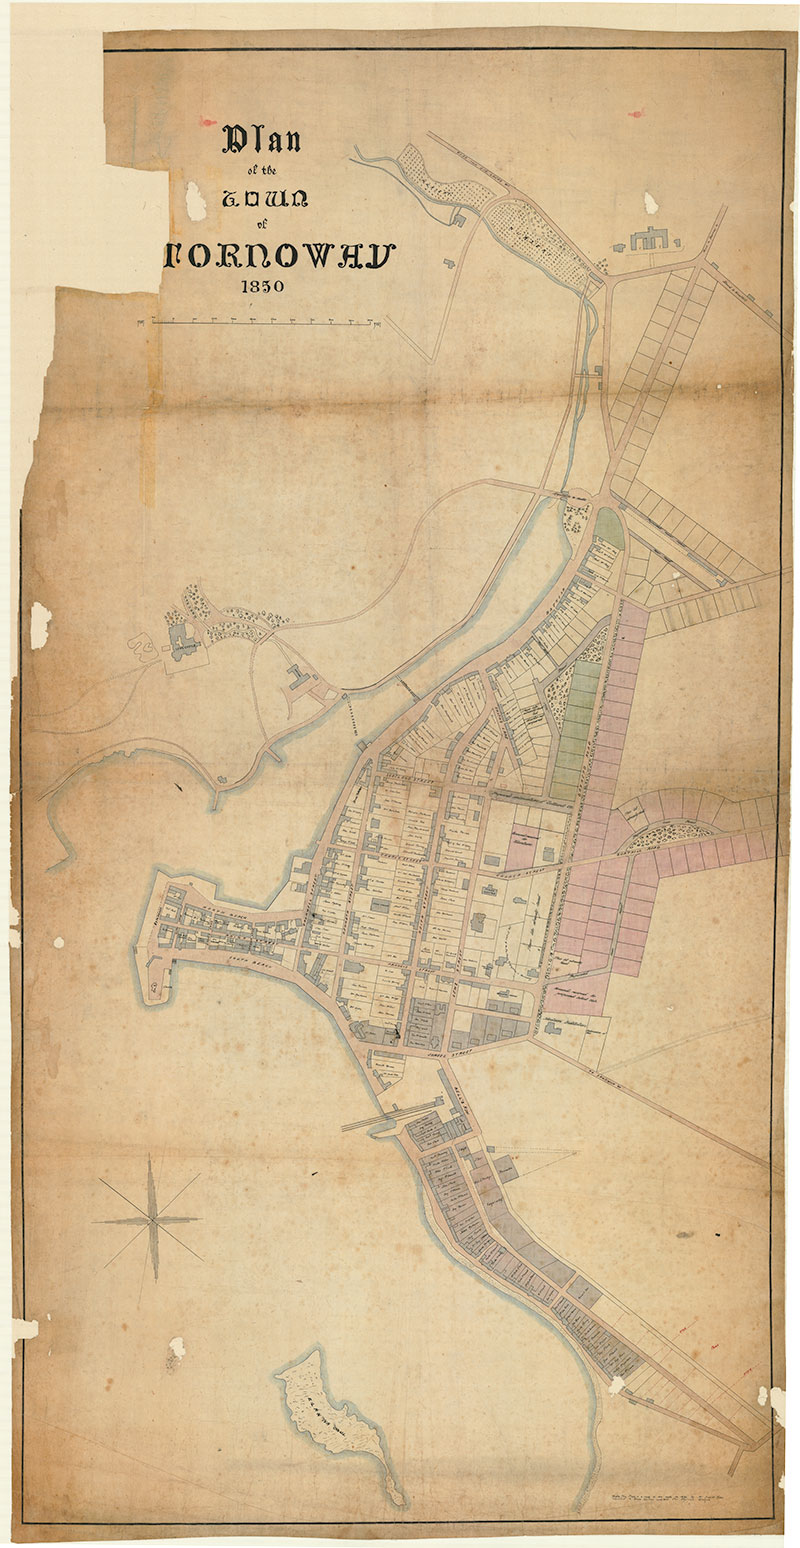 Plan of the town of Stornoway, 1850